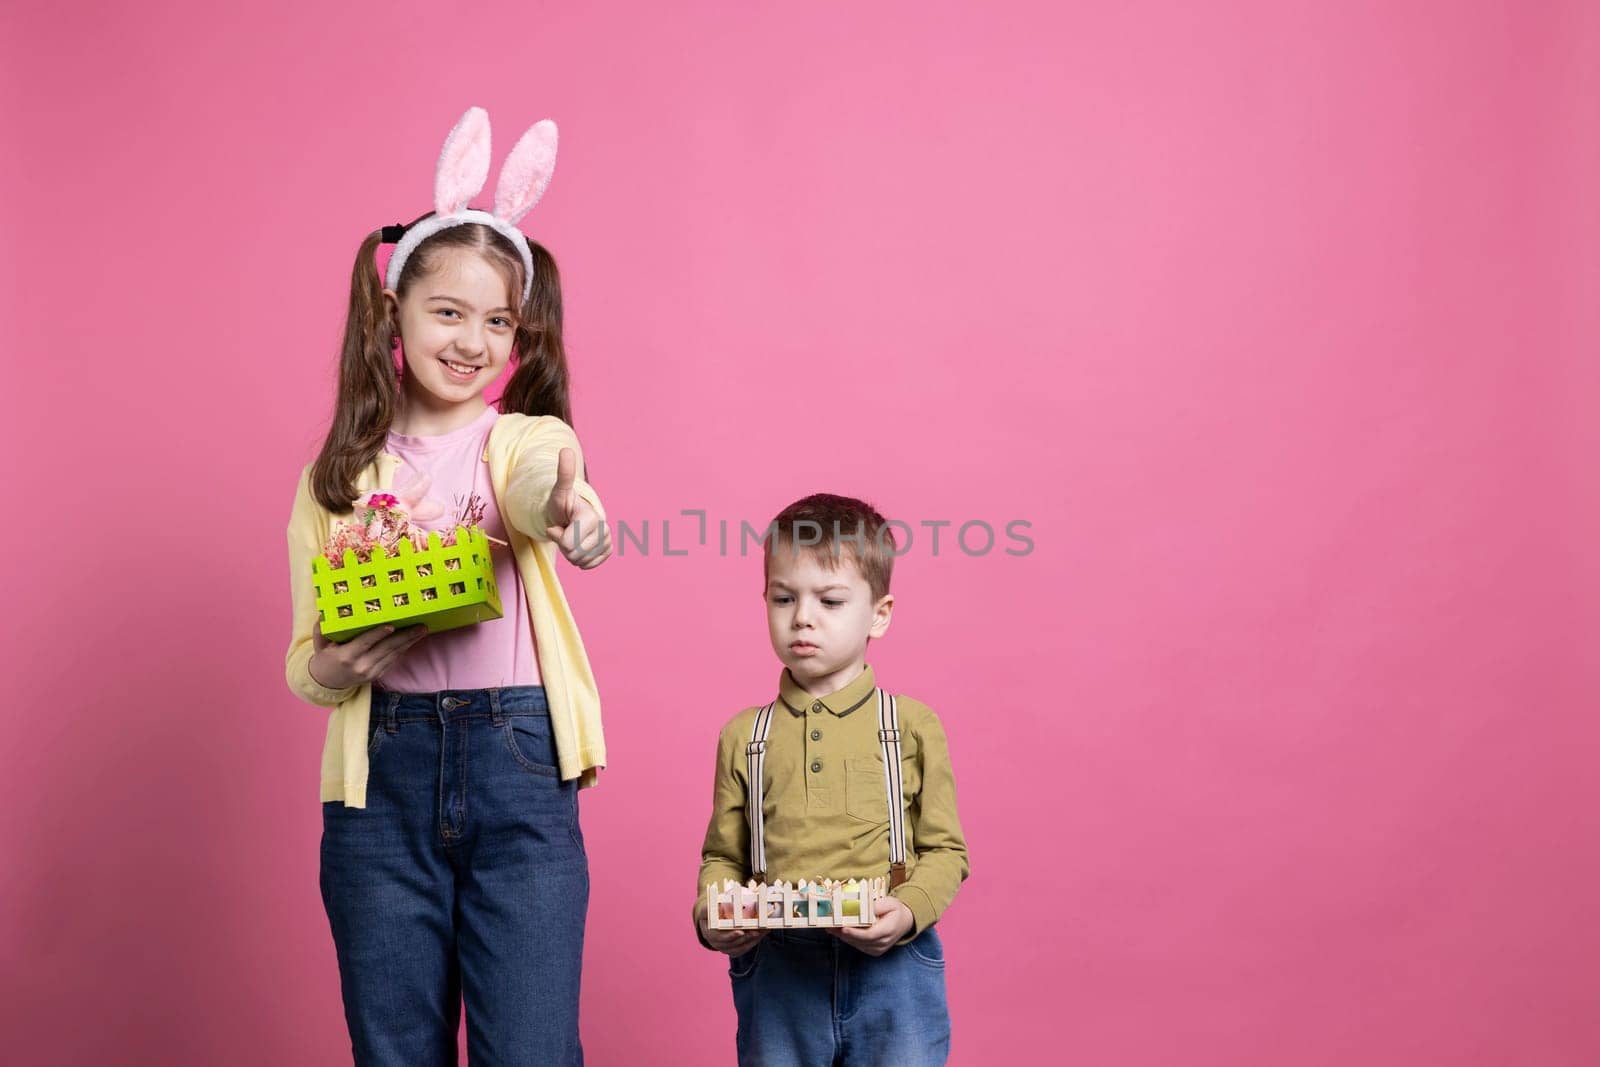 Joyful siblings feeling happy celebrating easter holiday and spring time, little girl giving thumbs up on camera. Brother and sister showing baskets filled with painted eggs and decorations.